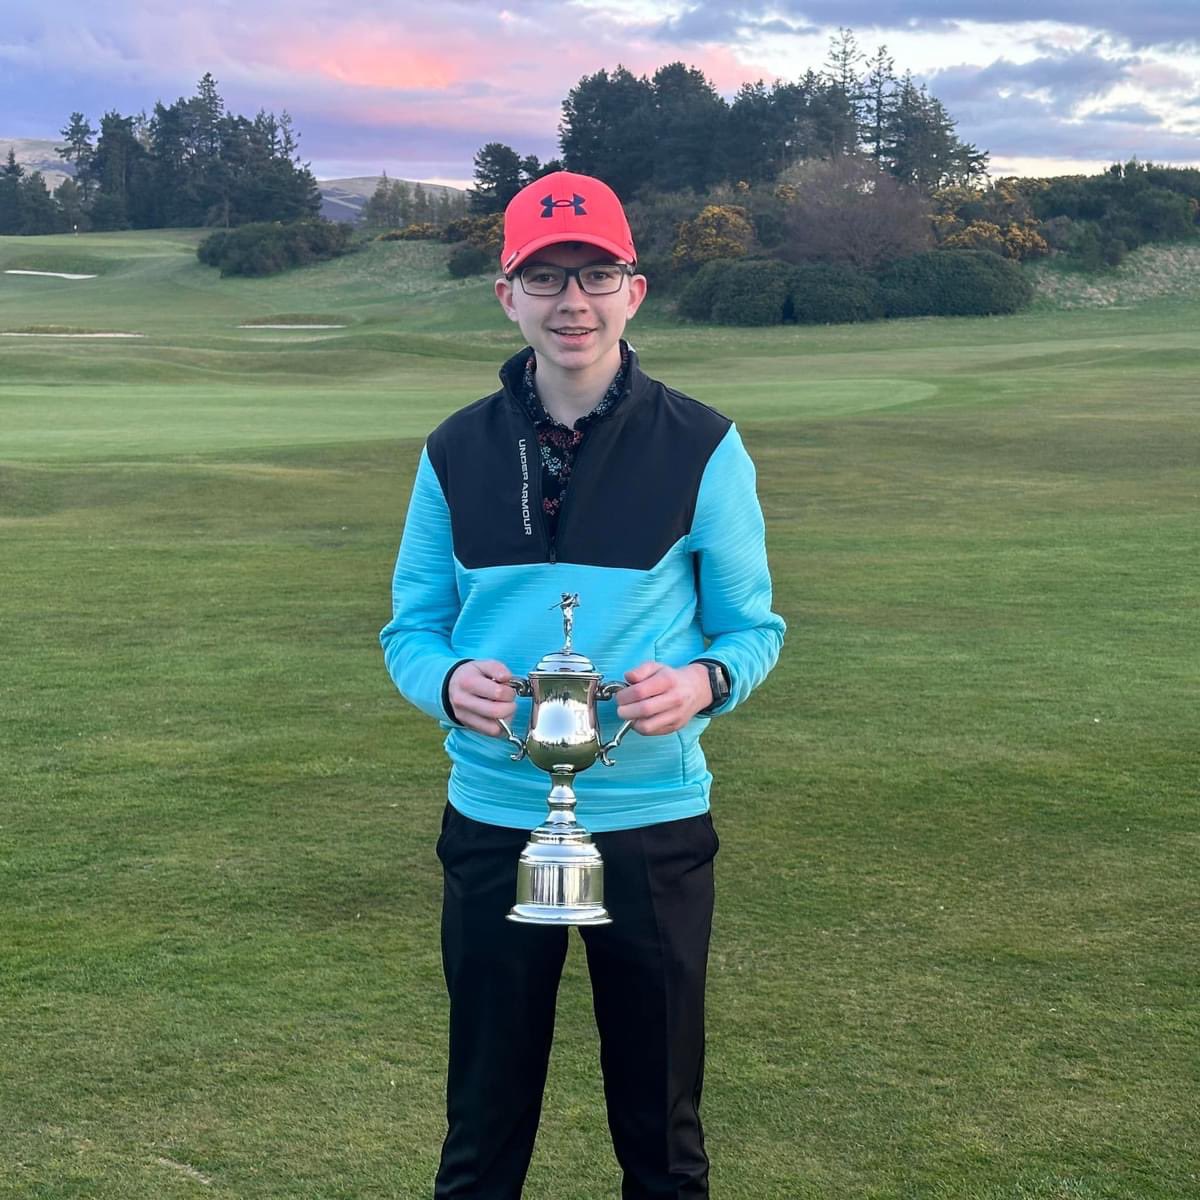 Great result for Max last weekend - 18 Hole Net Winner 🏆 at the first Junior Golf Scotland TopTracer series final played at Gleneagles on the King’s Course! ⛳️🏌🏽‍♂️@S4LHSYT @LHS_HWB